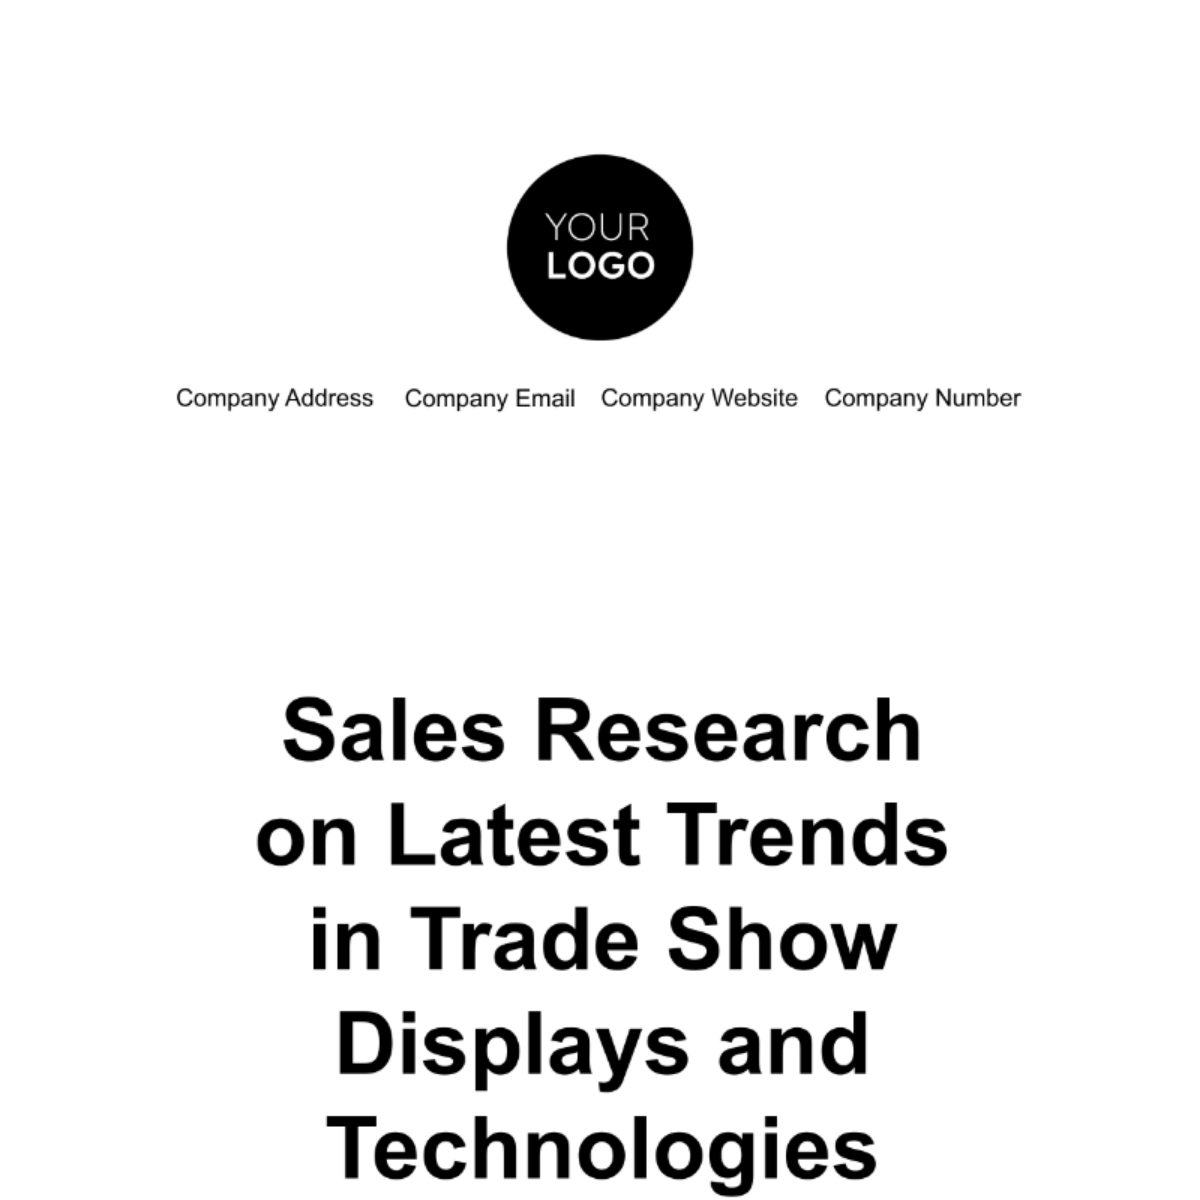 Sales Research on Latest Trends in Trade Show Displays and Technologies Template